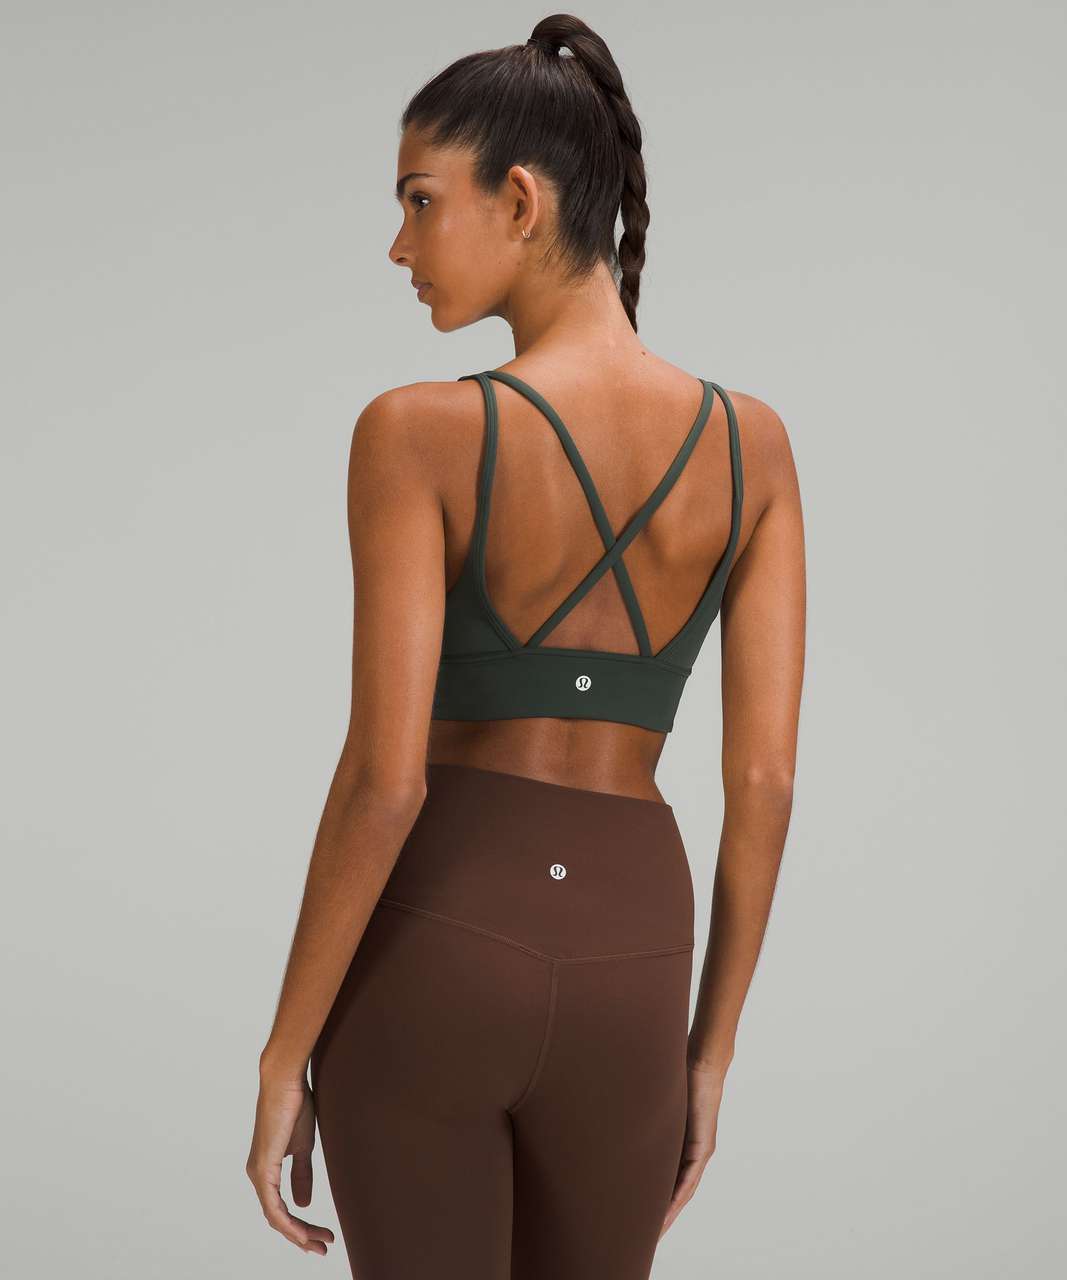 Lululemon In Alignment Longline Bra *Light Support, B/C Cup - Smoked Spruce